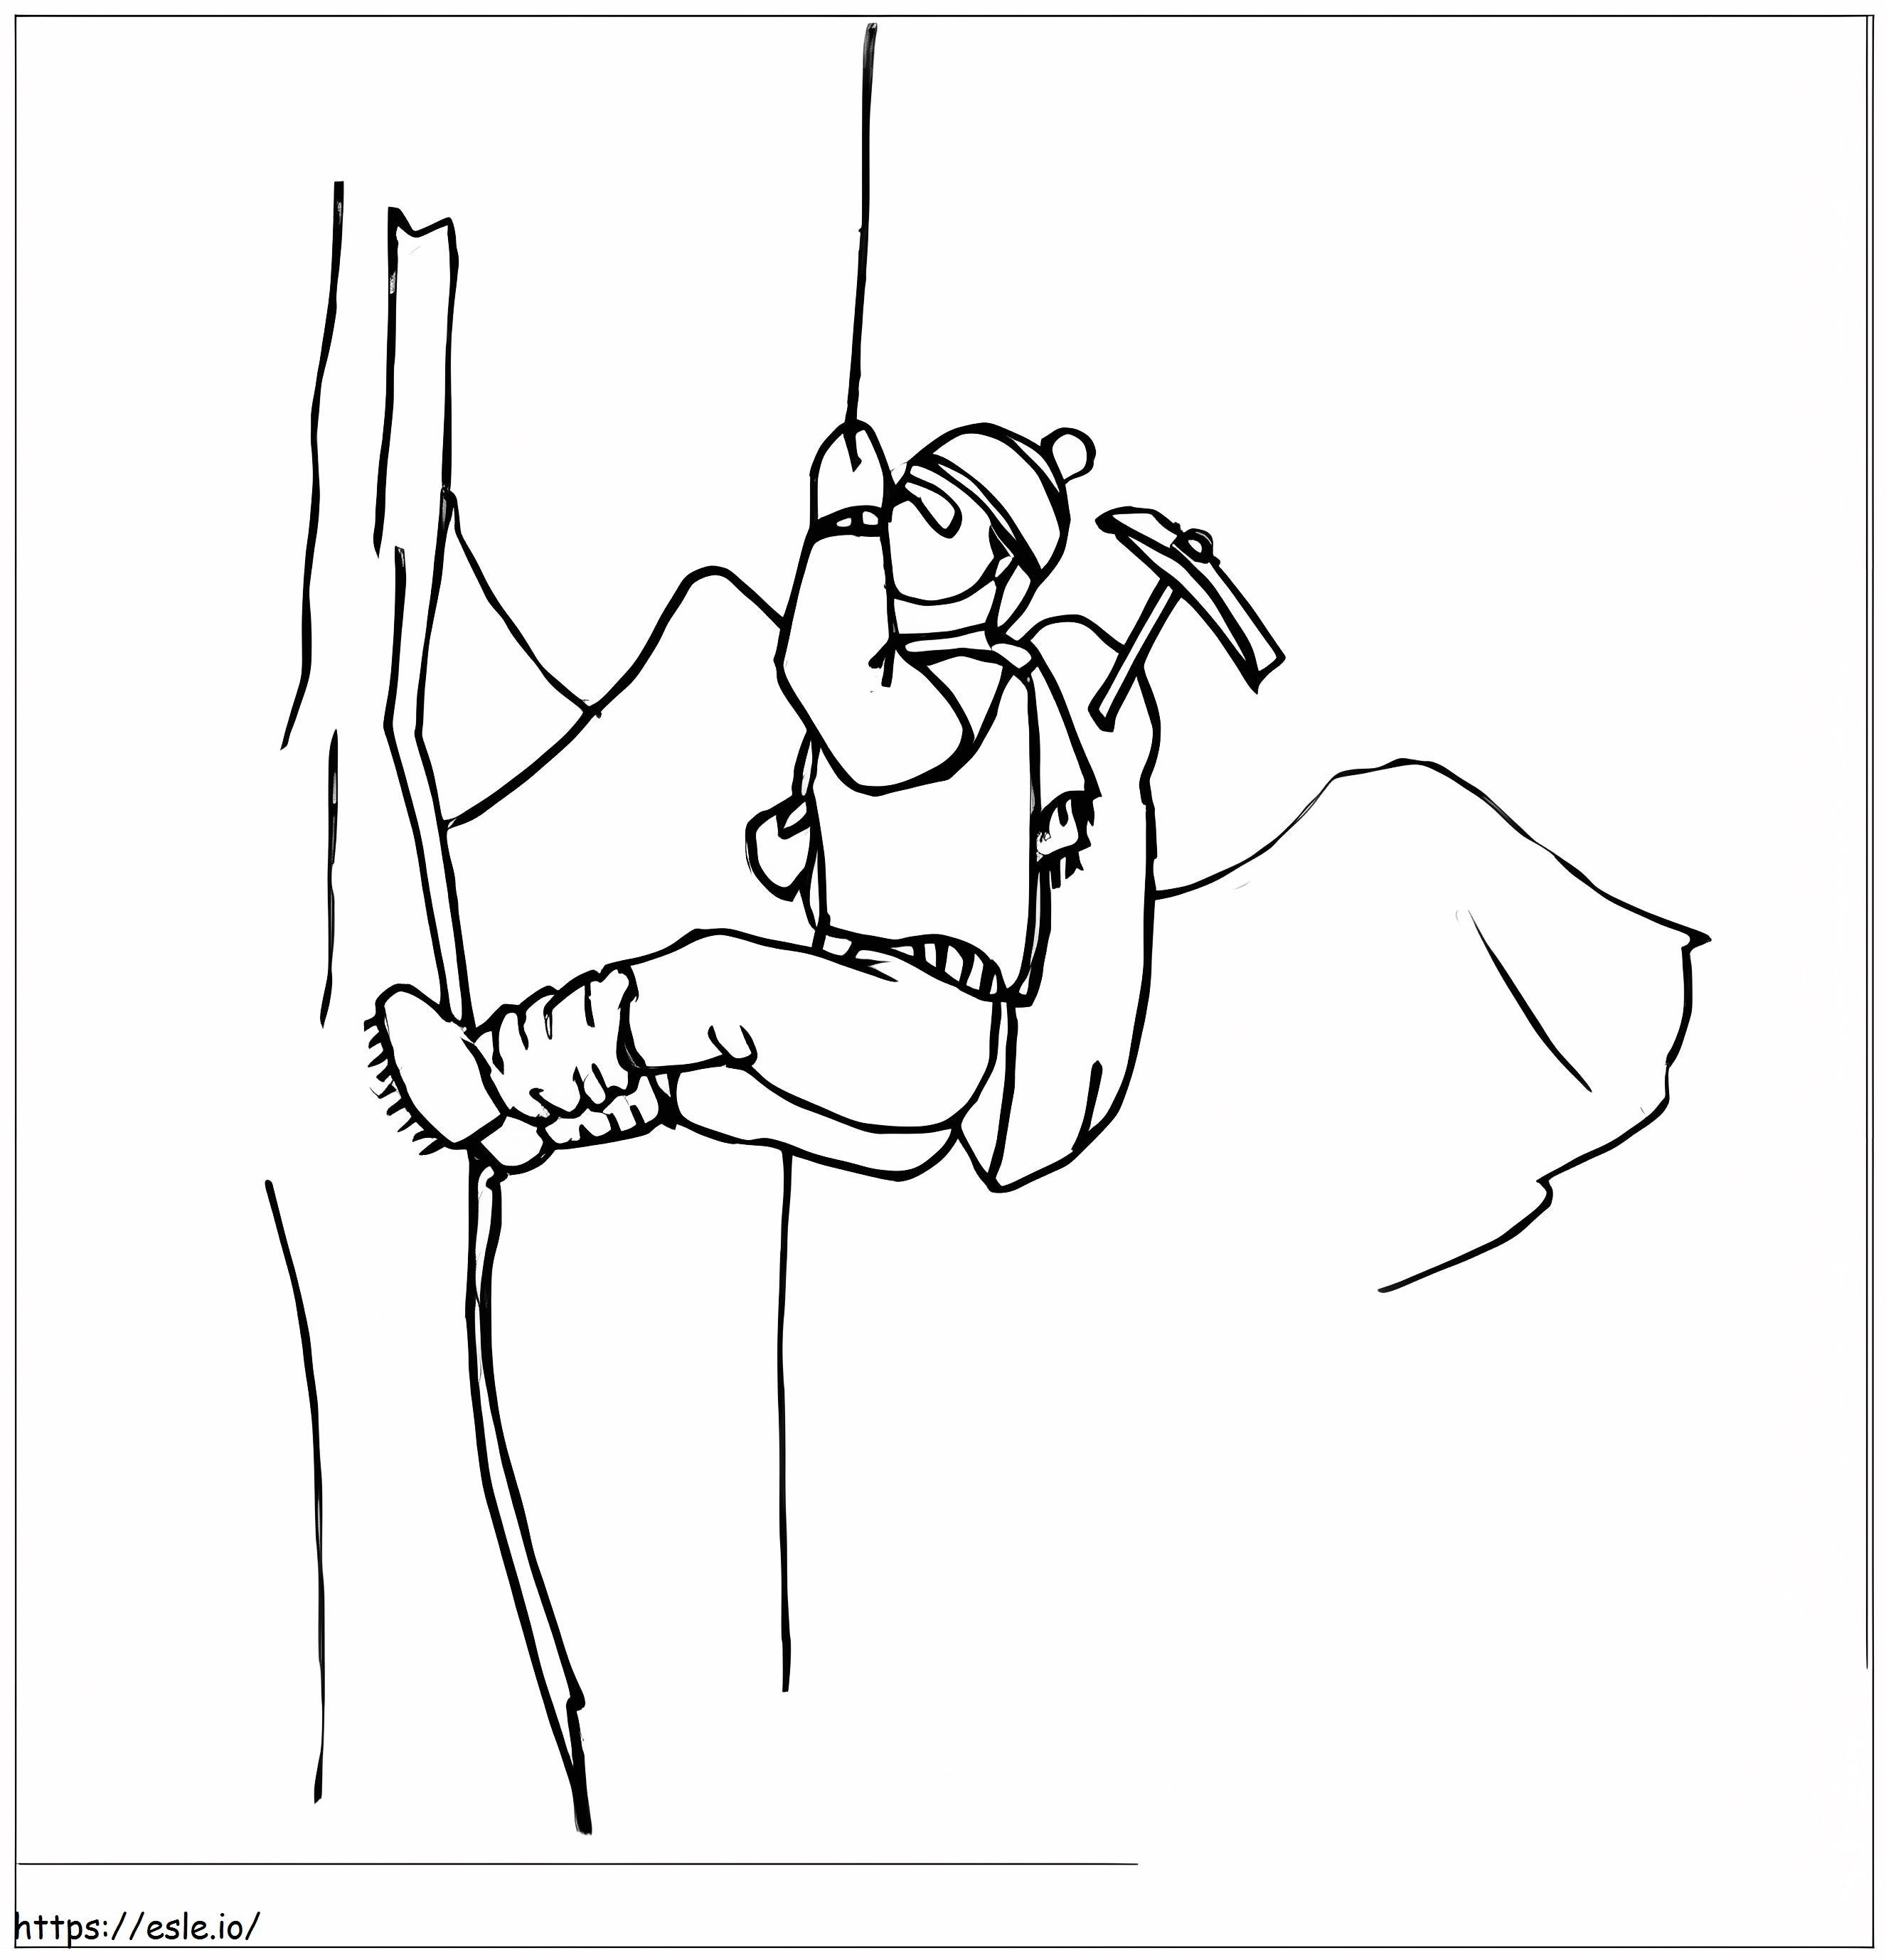 Mountain Climbing coloring page